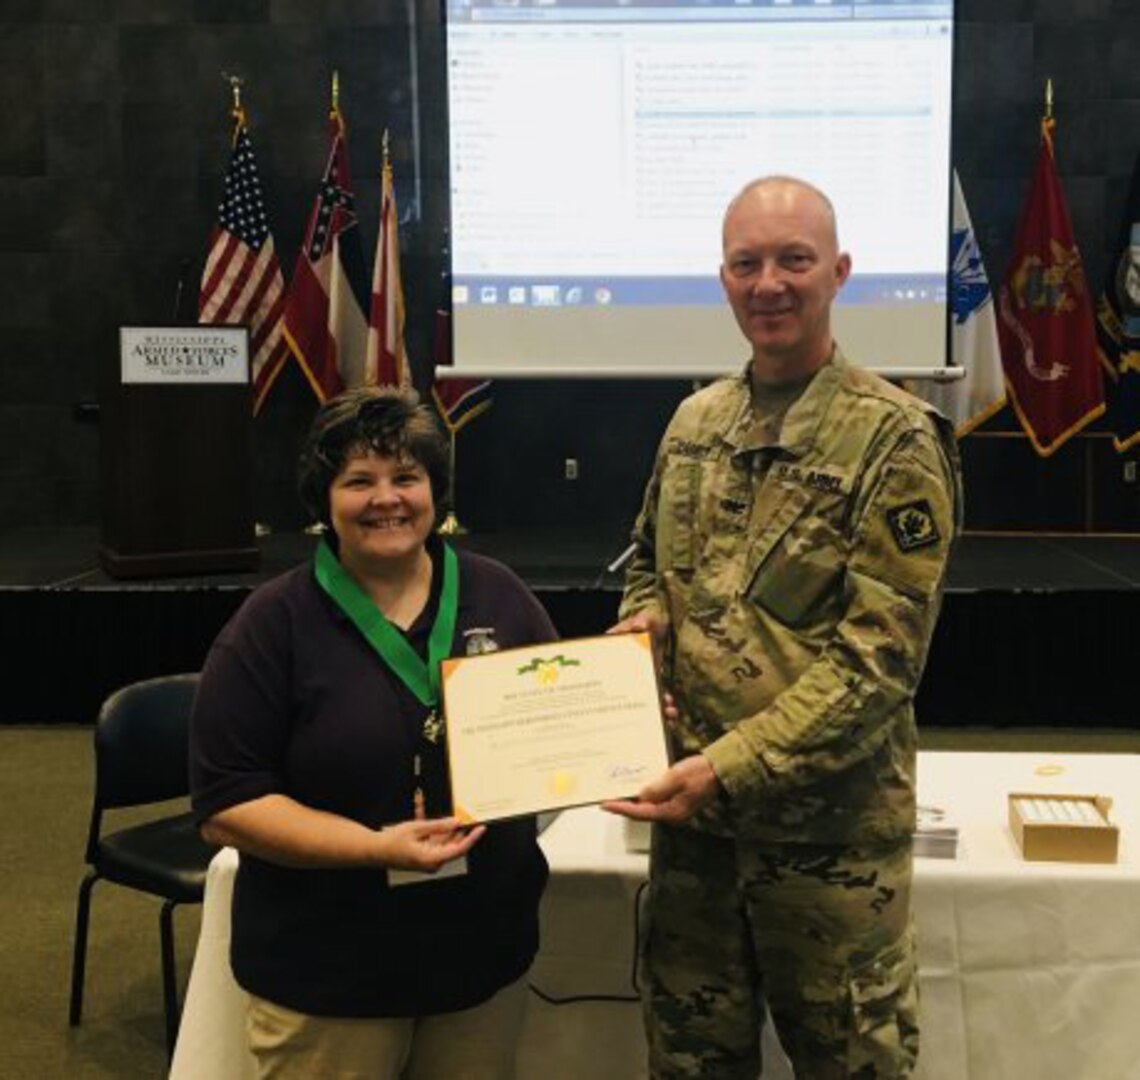 Rita McCarty has served as the Mississippi Army National Guard Cultural Resource Manager for 13 years. She was recognized by MSARNG Chief of Staff Col. Amos Parker with the Mississippi Meritorious Civilian Service Ribbon, the highest honor awarded to a civilian employee of the MSARNG. The Defense Department cited her program for an award.